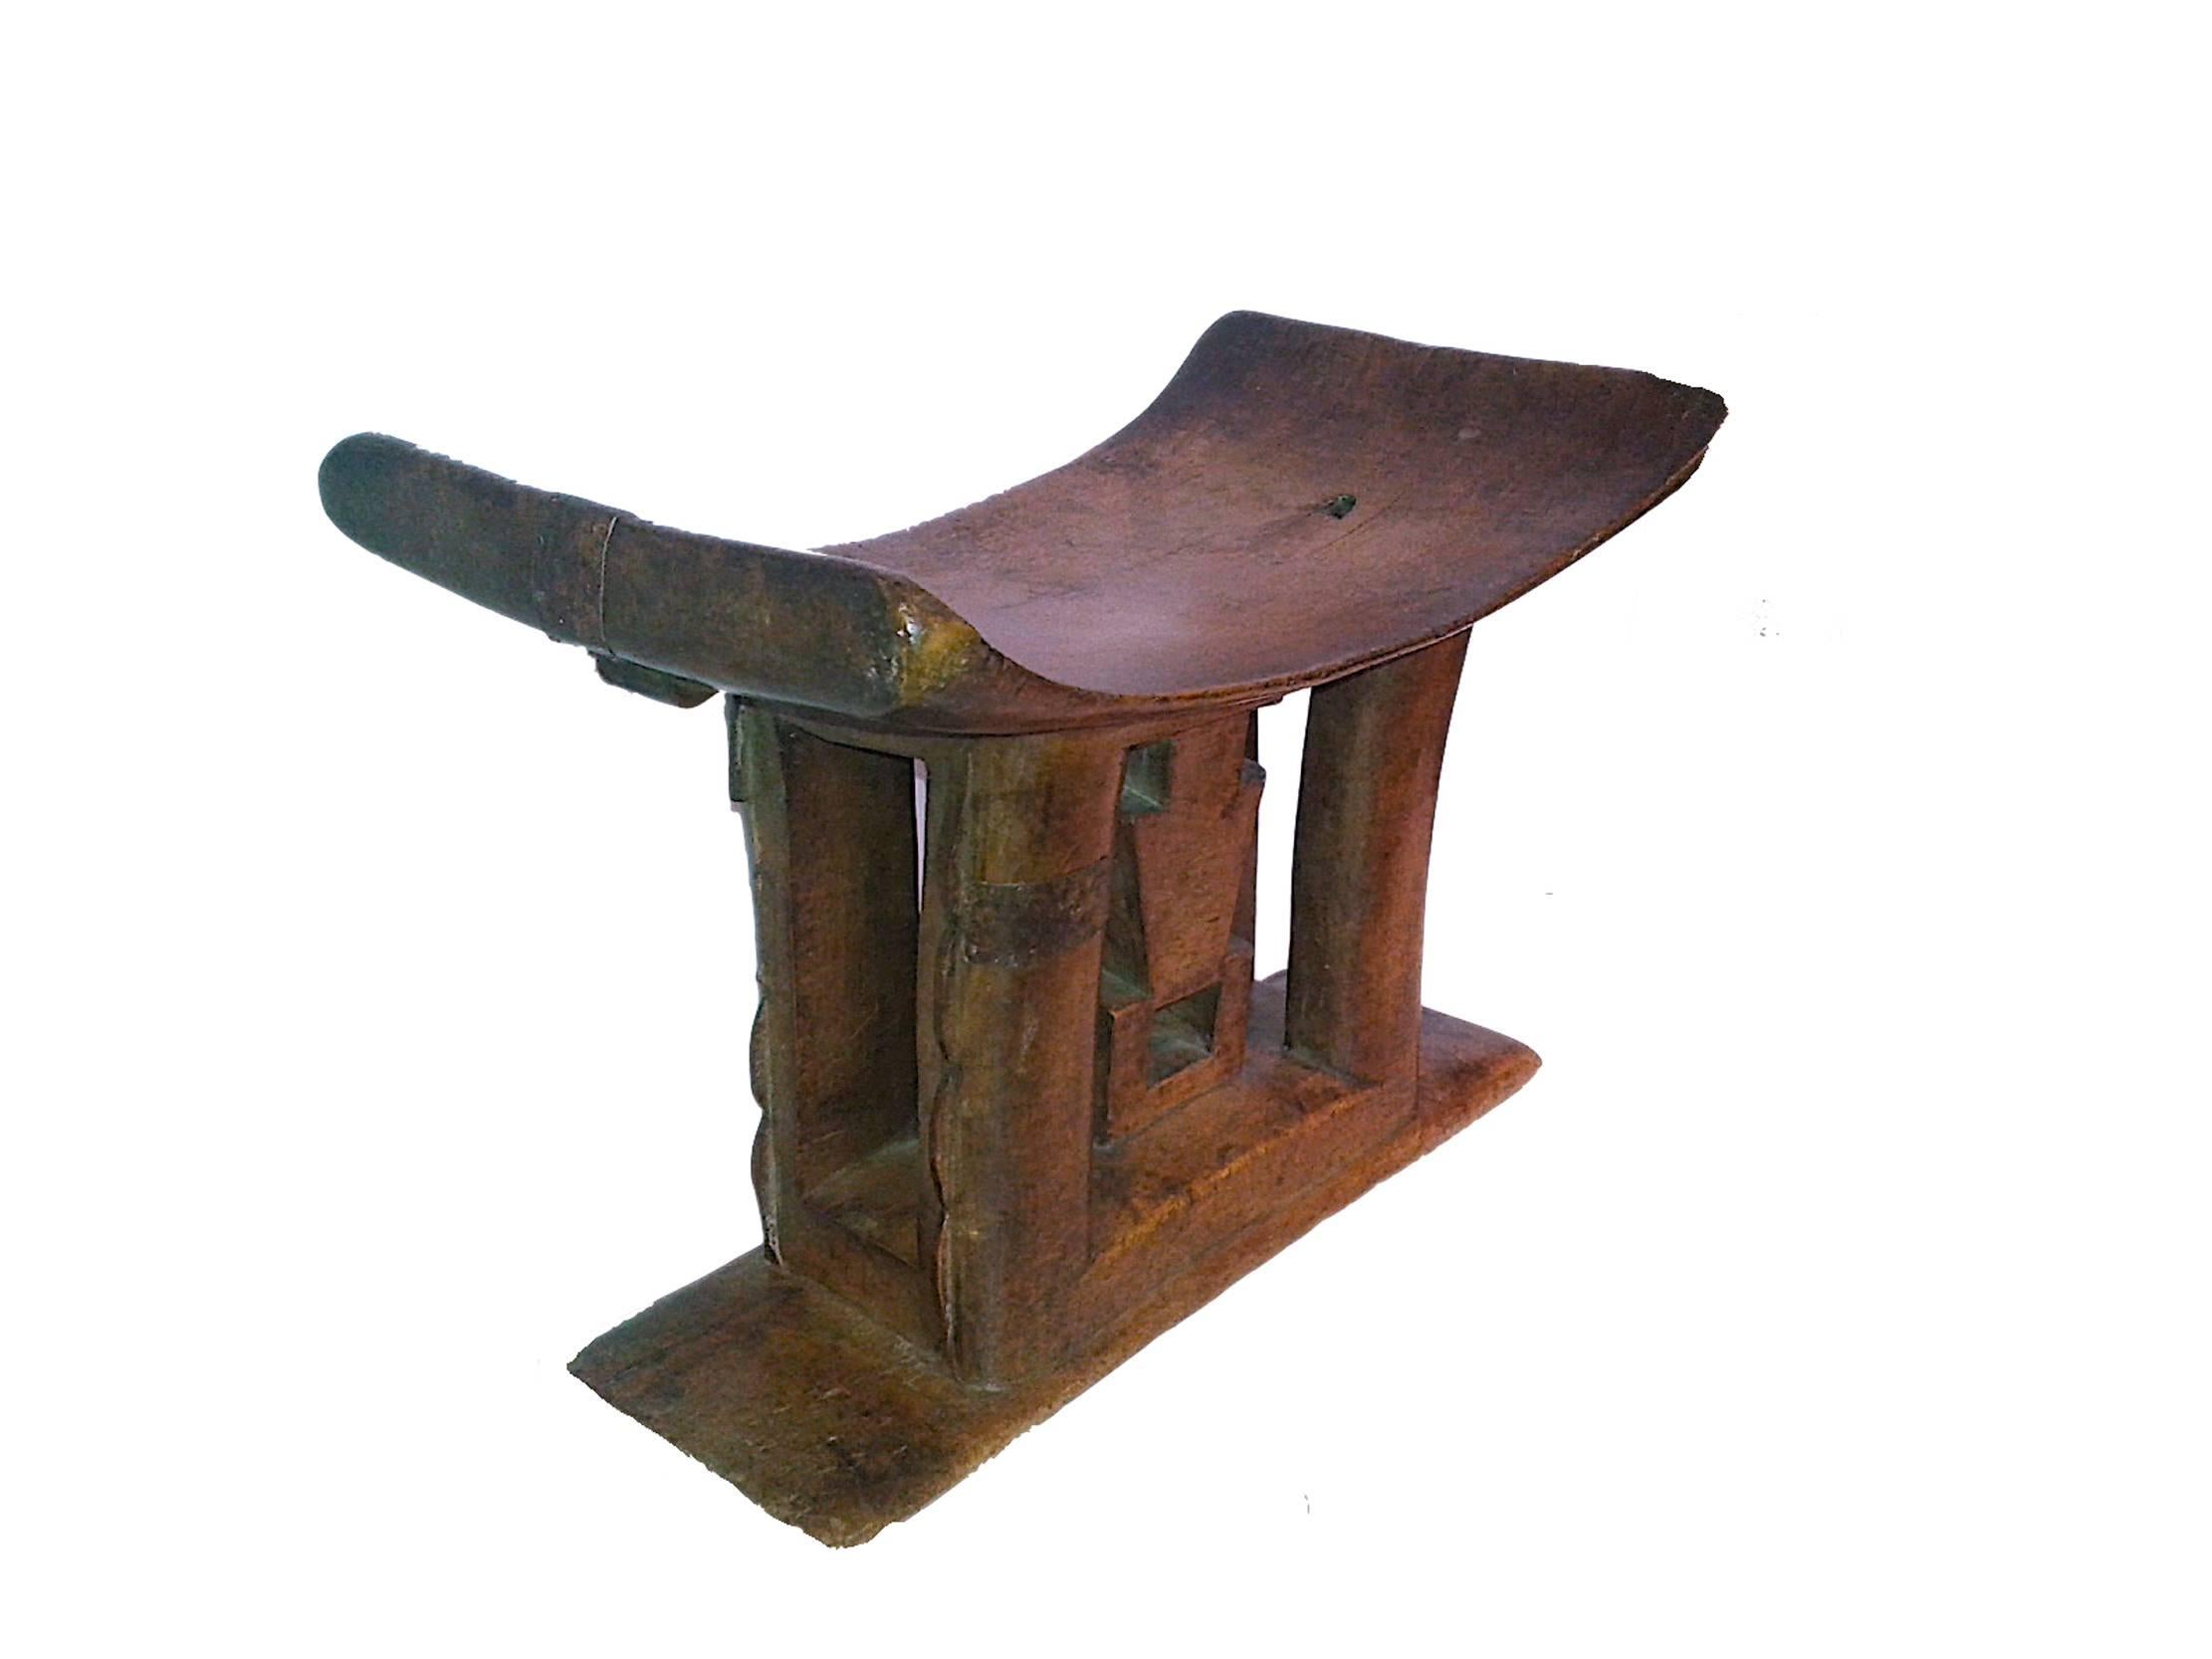 An Ashanti stool, a traditional carved personal seat from Ghana, mid-20th Century. Hand-carved from a single piece of wood. Use as a low end table, stand or stool.